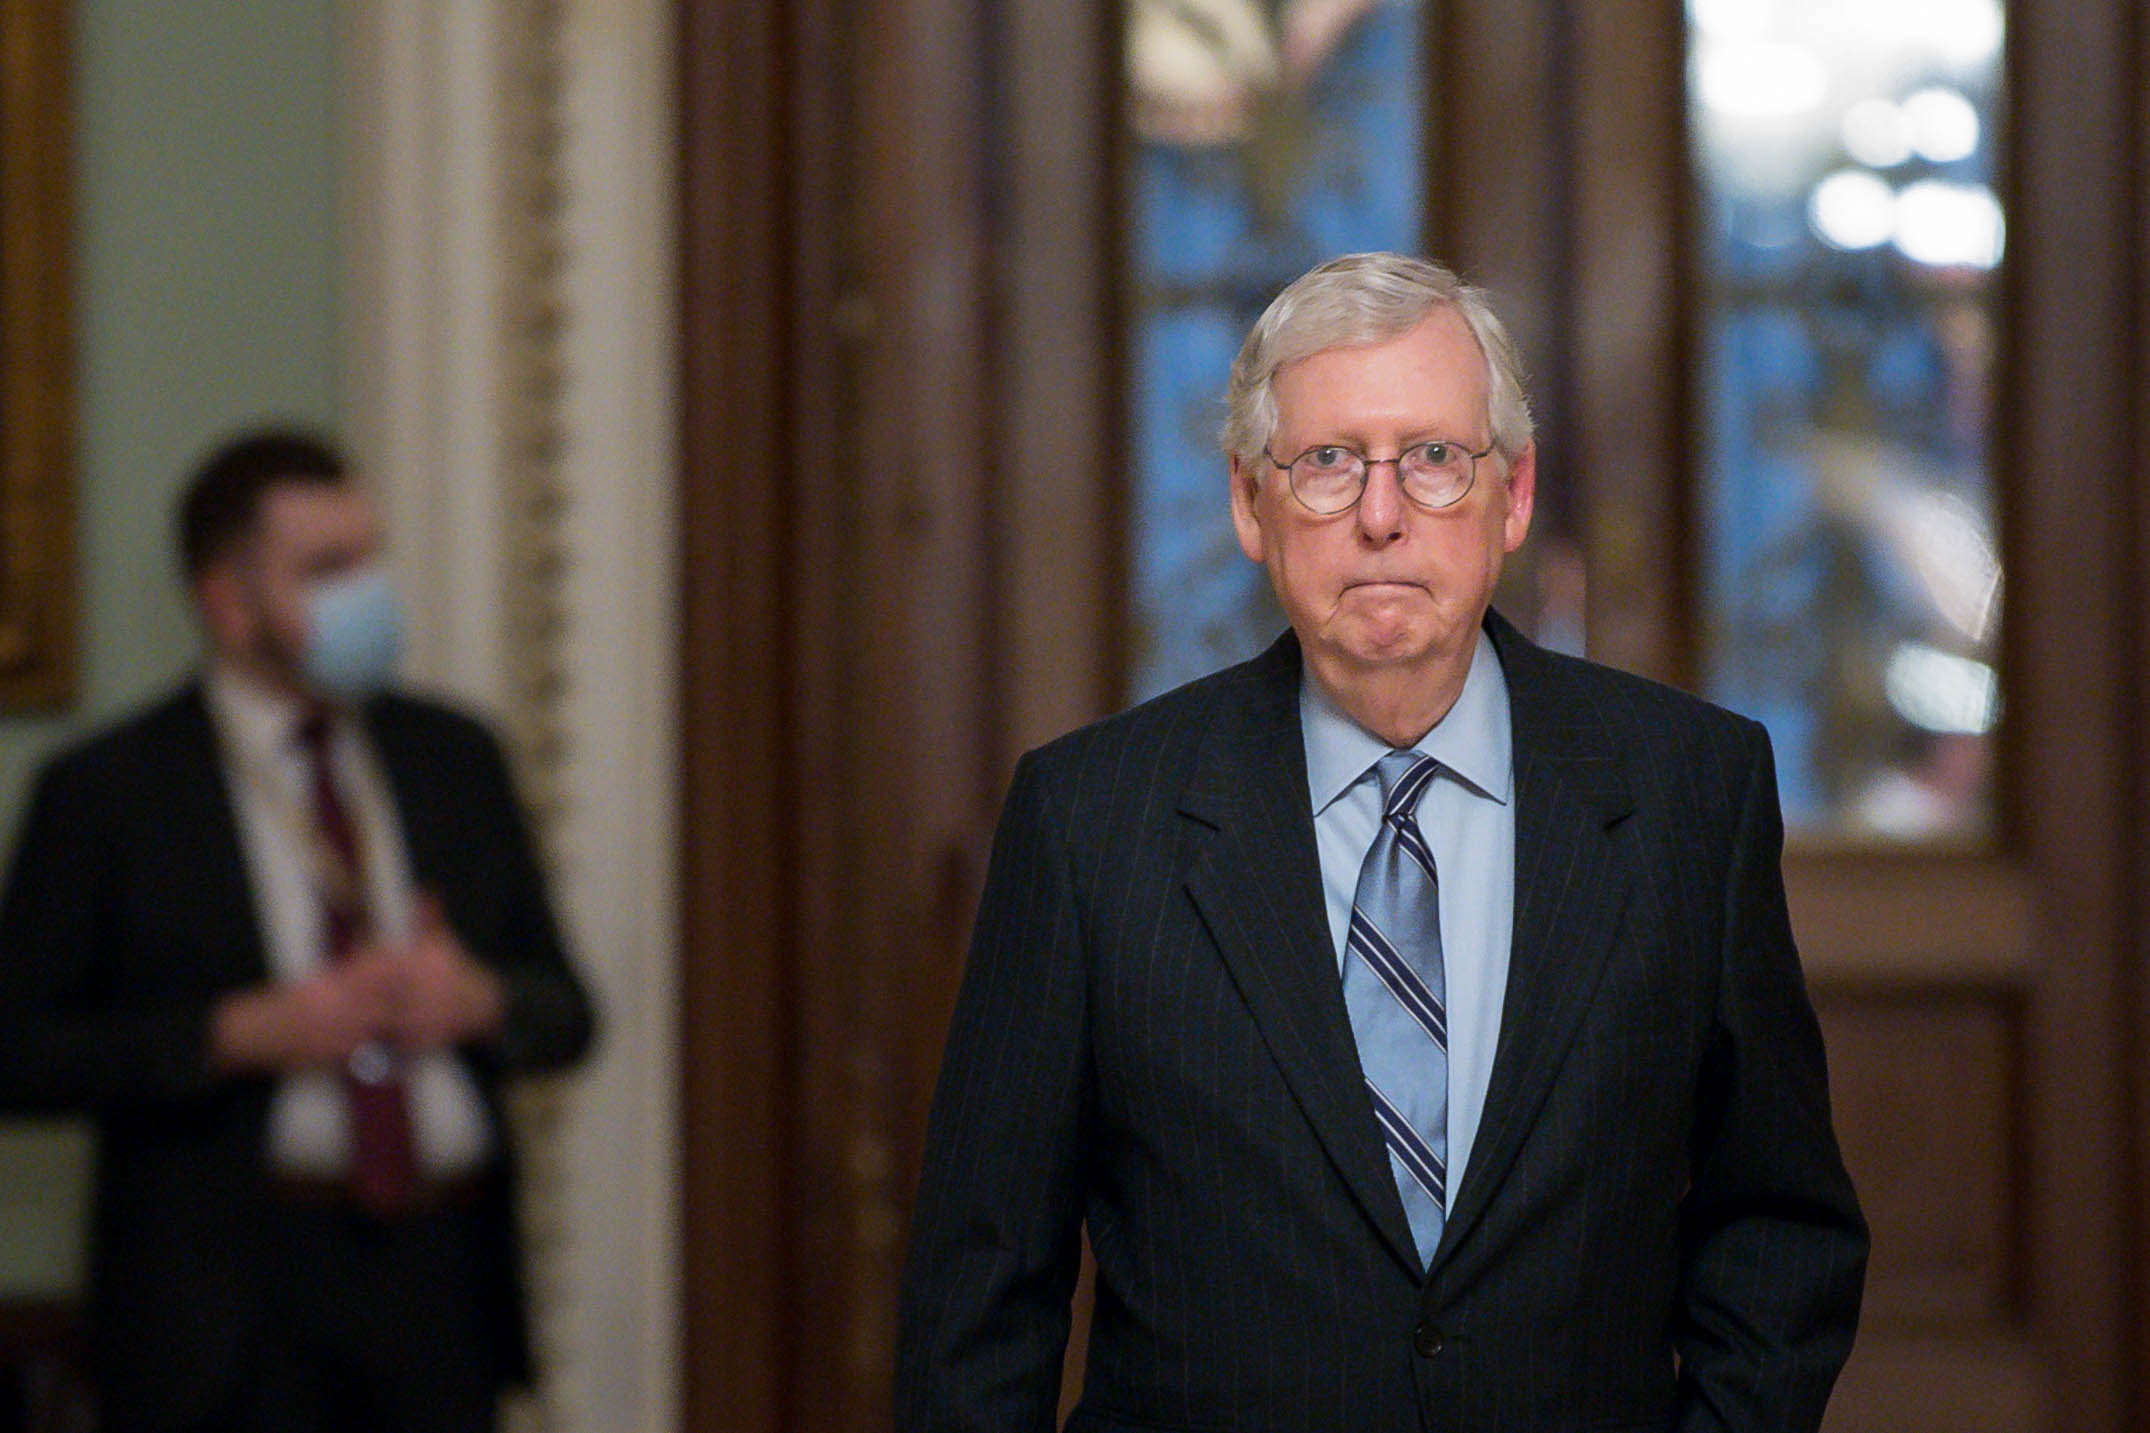 PHOTO: Senate Minority Leader Mitch McConnell leaves the Senate Chamber in the U.S. Capitol on Aug. 11, 2021, in Washington, D.C.